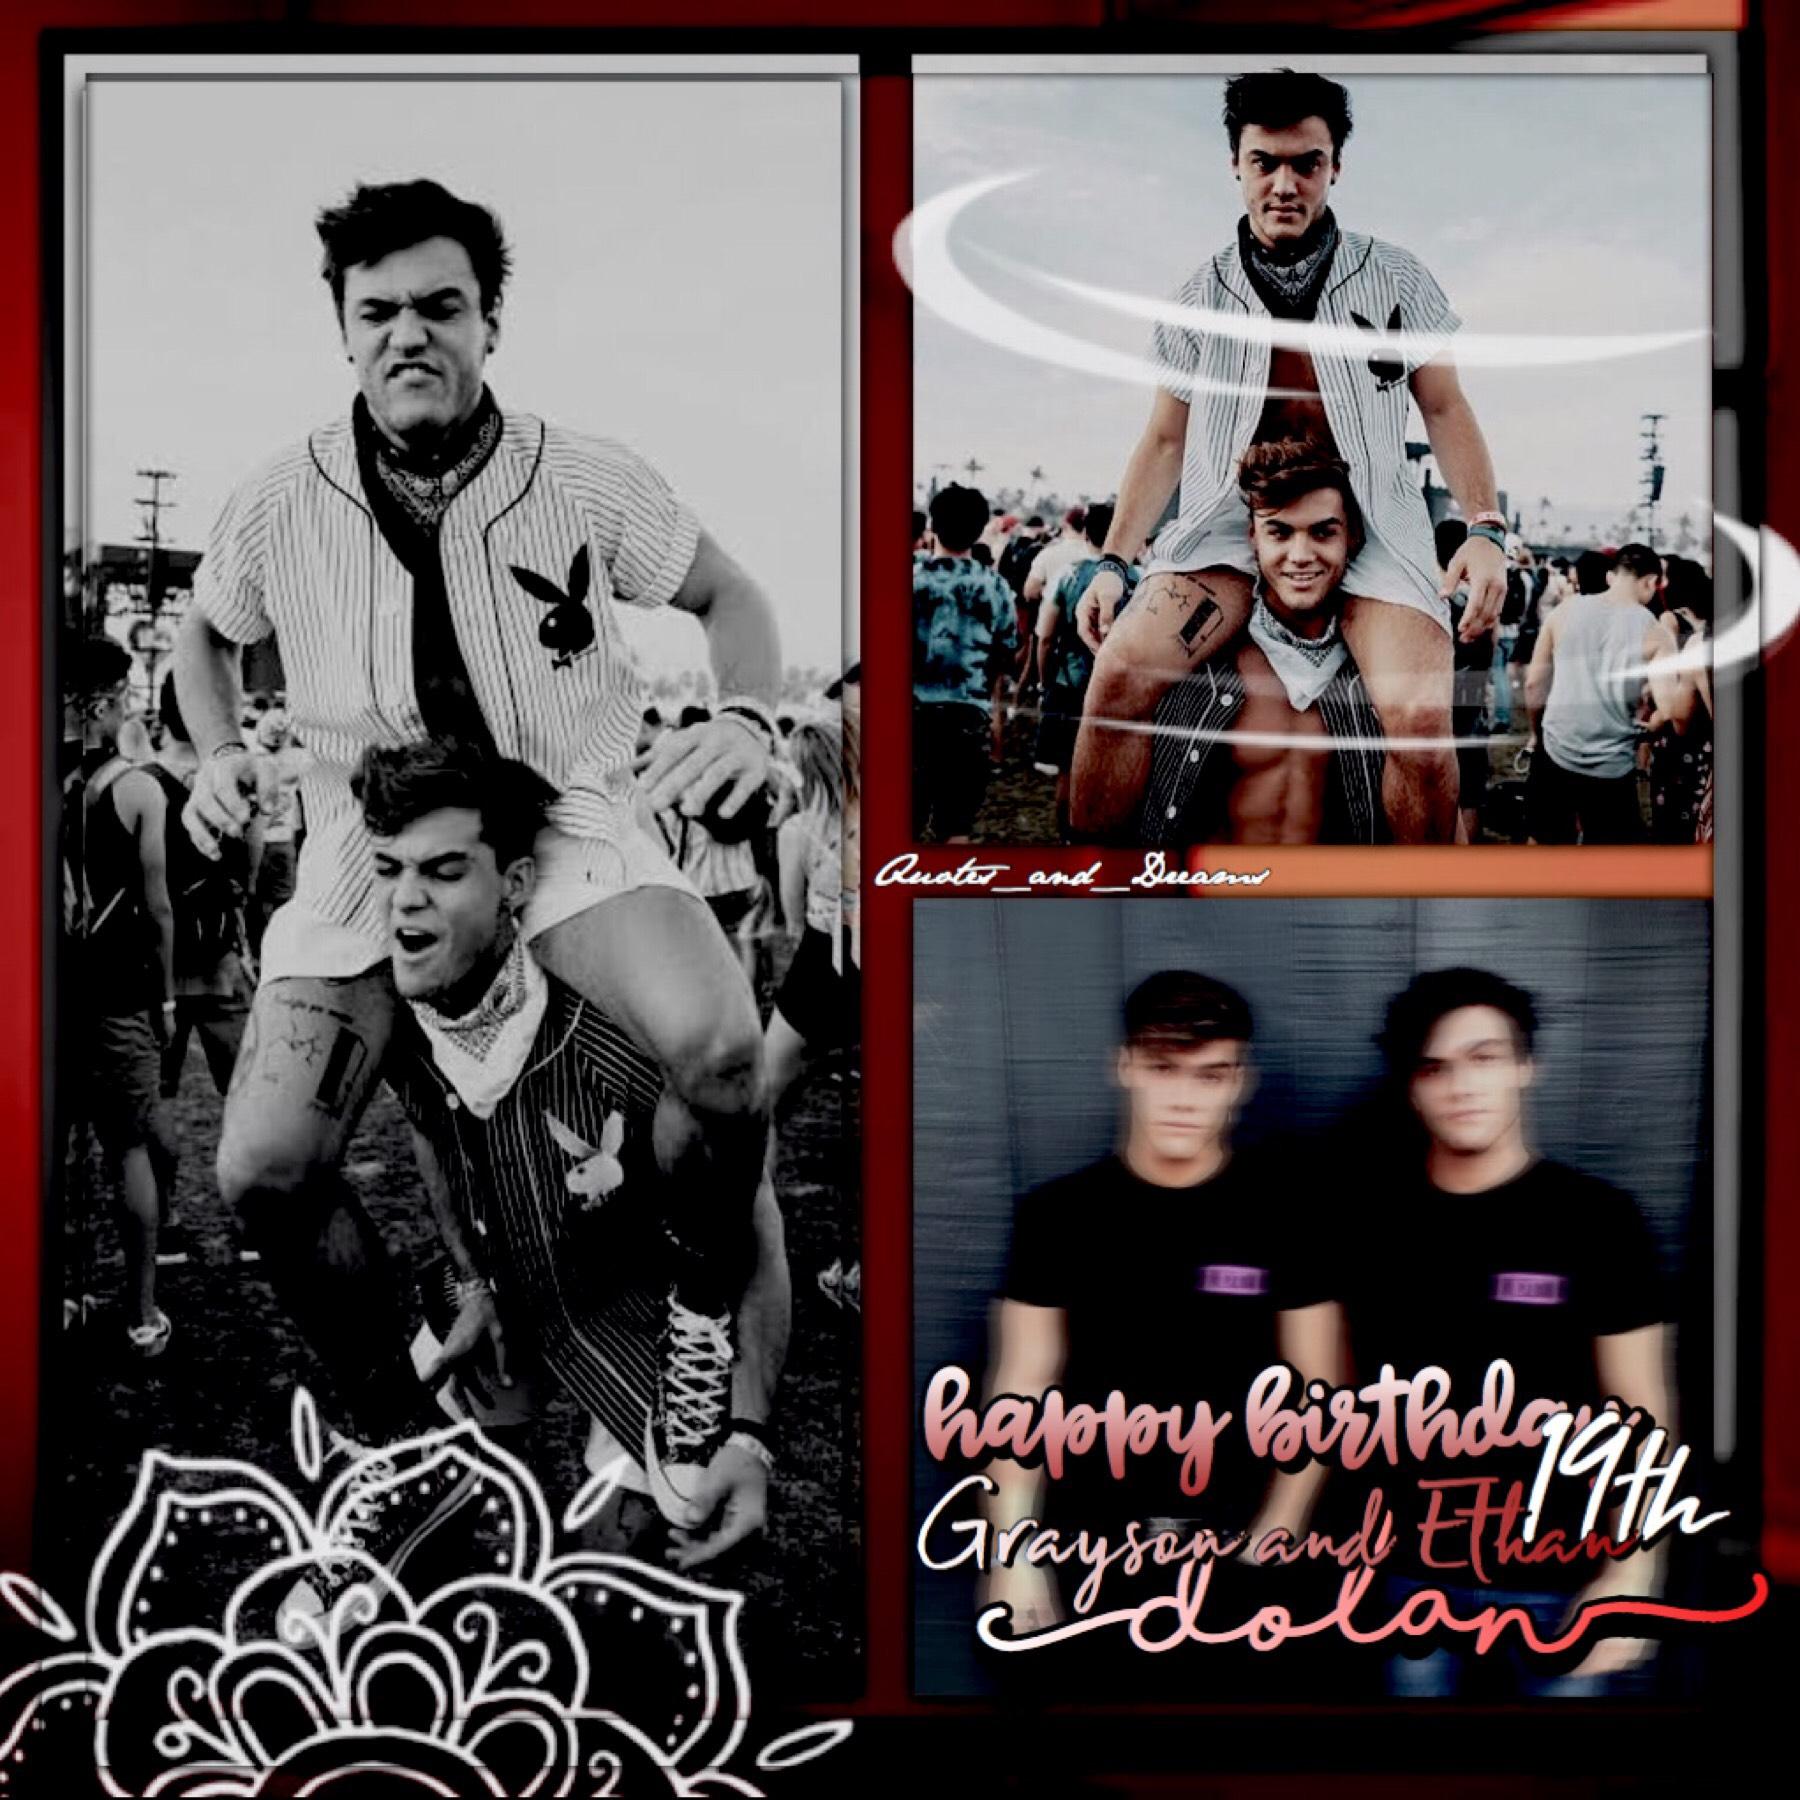 I KNOW IM LATE BUT HAPPY 19TH BIRTHDAY TO GRAYSON AND ETHAN DOLAN ❤️ love you guys 💕